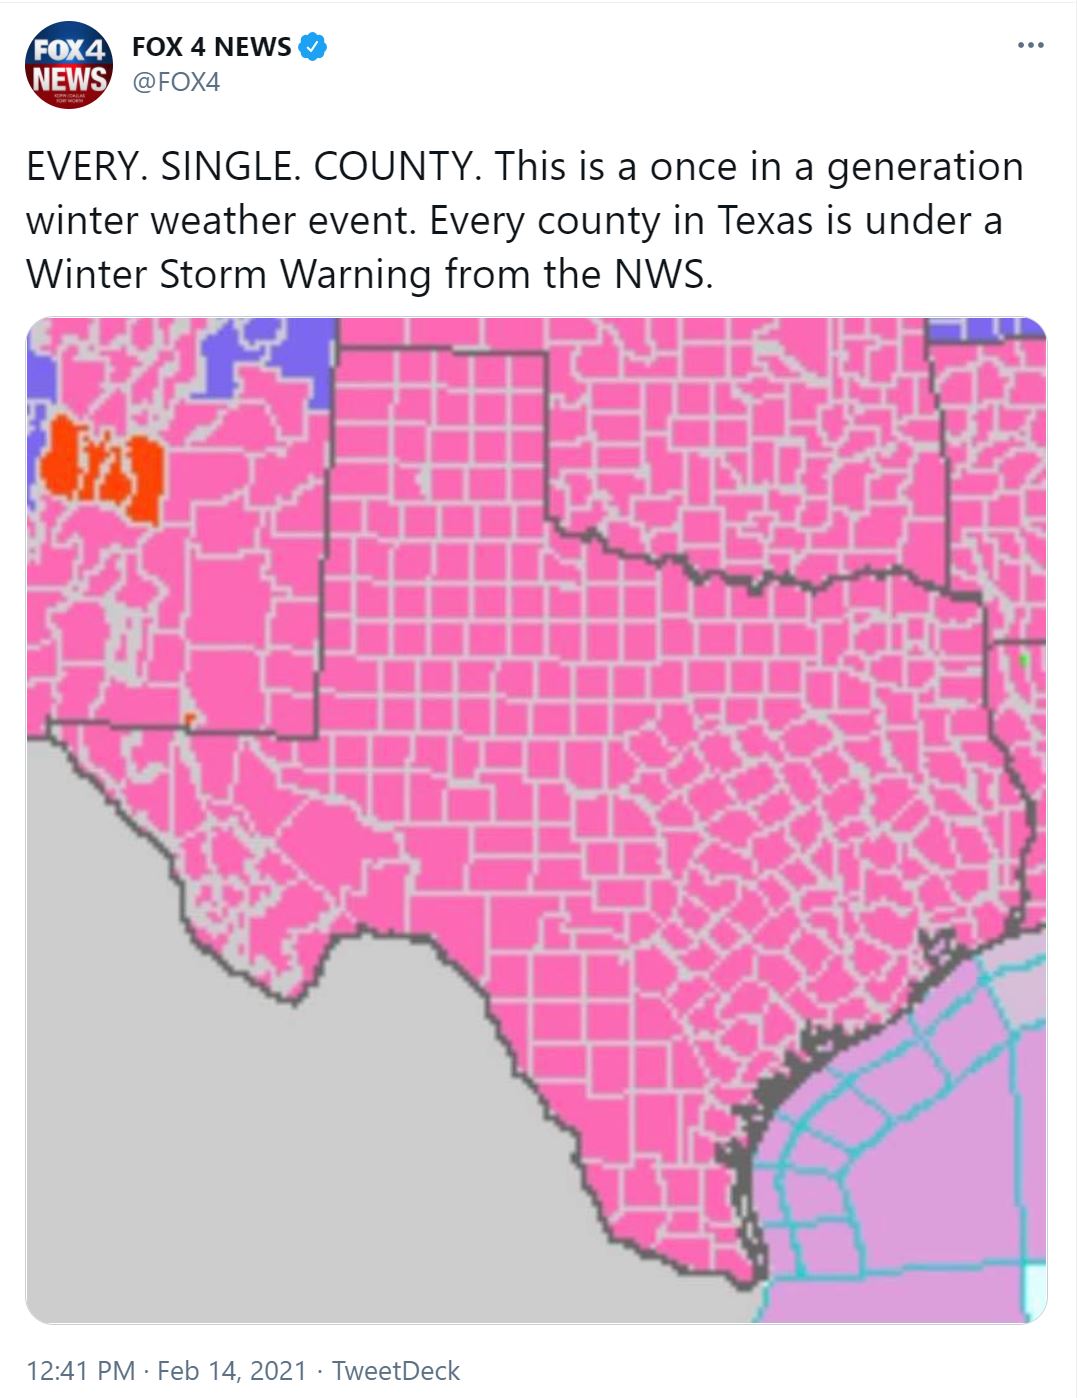 Every Texas county under a winter storm warning